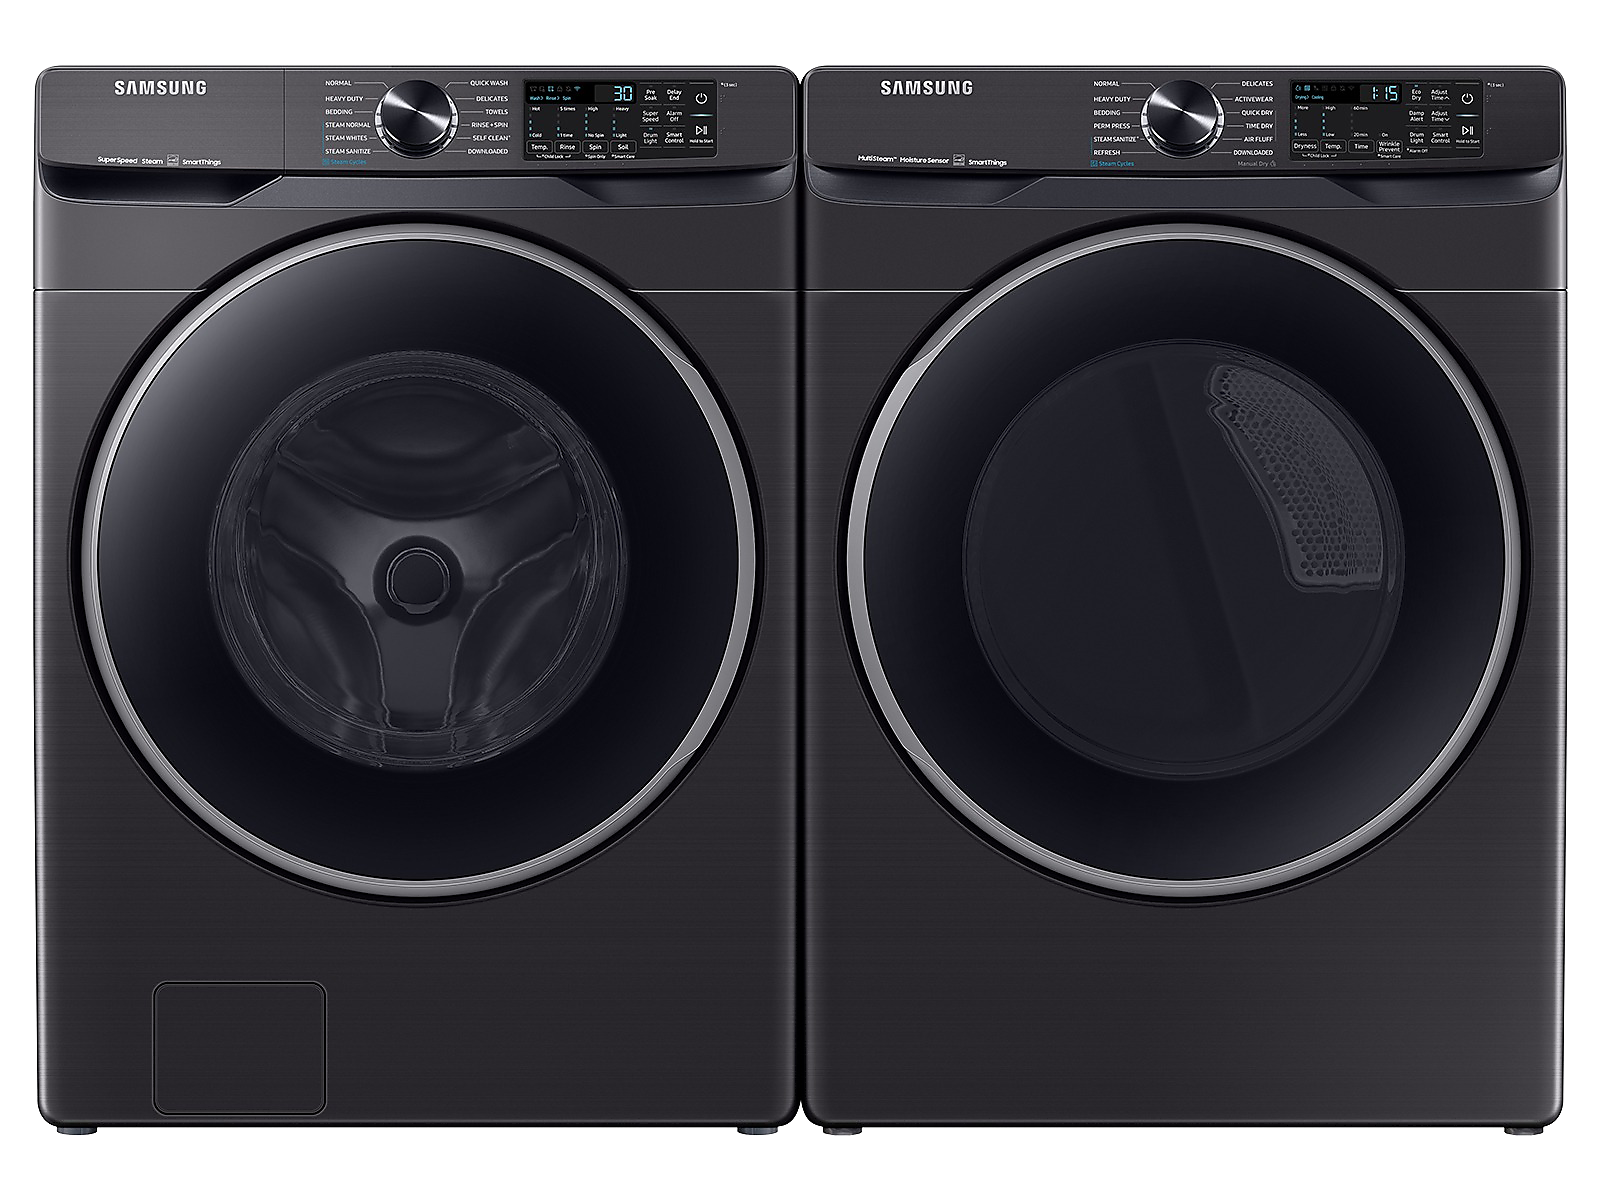 Samsung Smart Front Load Super Speed Wash Washer and Smart Steam Sanitize+ Electric Dryer package in Brushed in Black(BNDL-1634760953981) photo